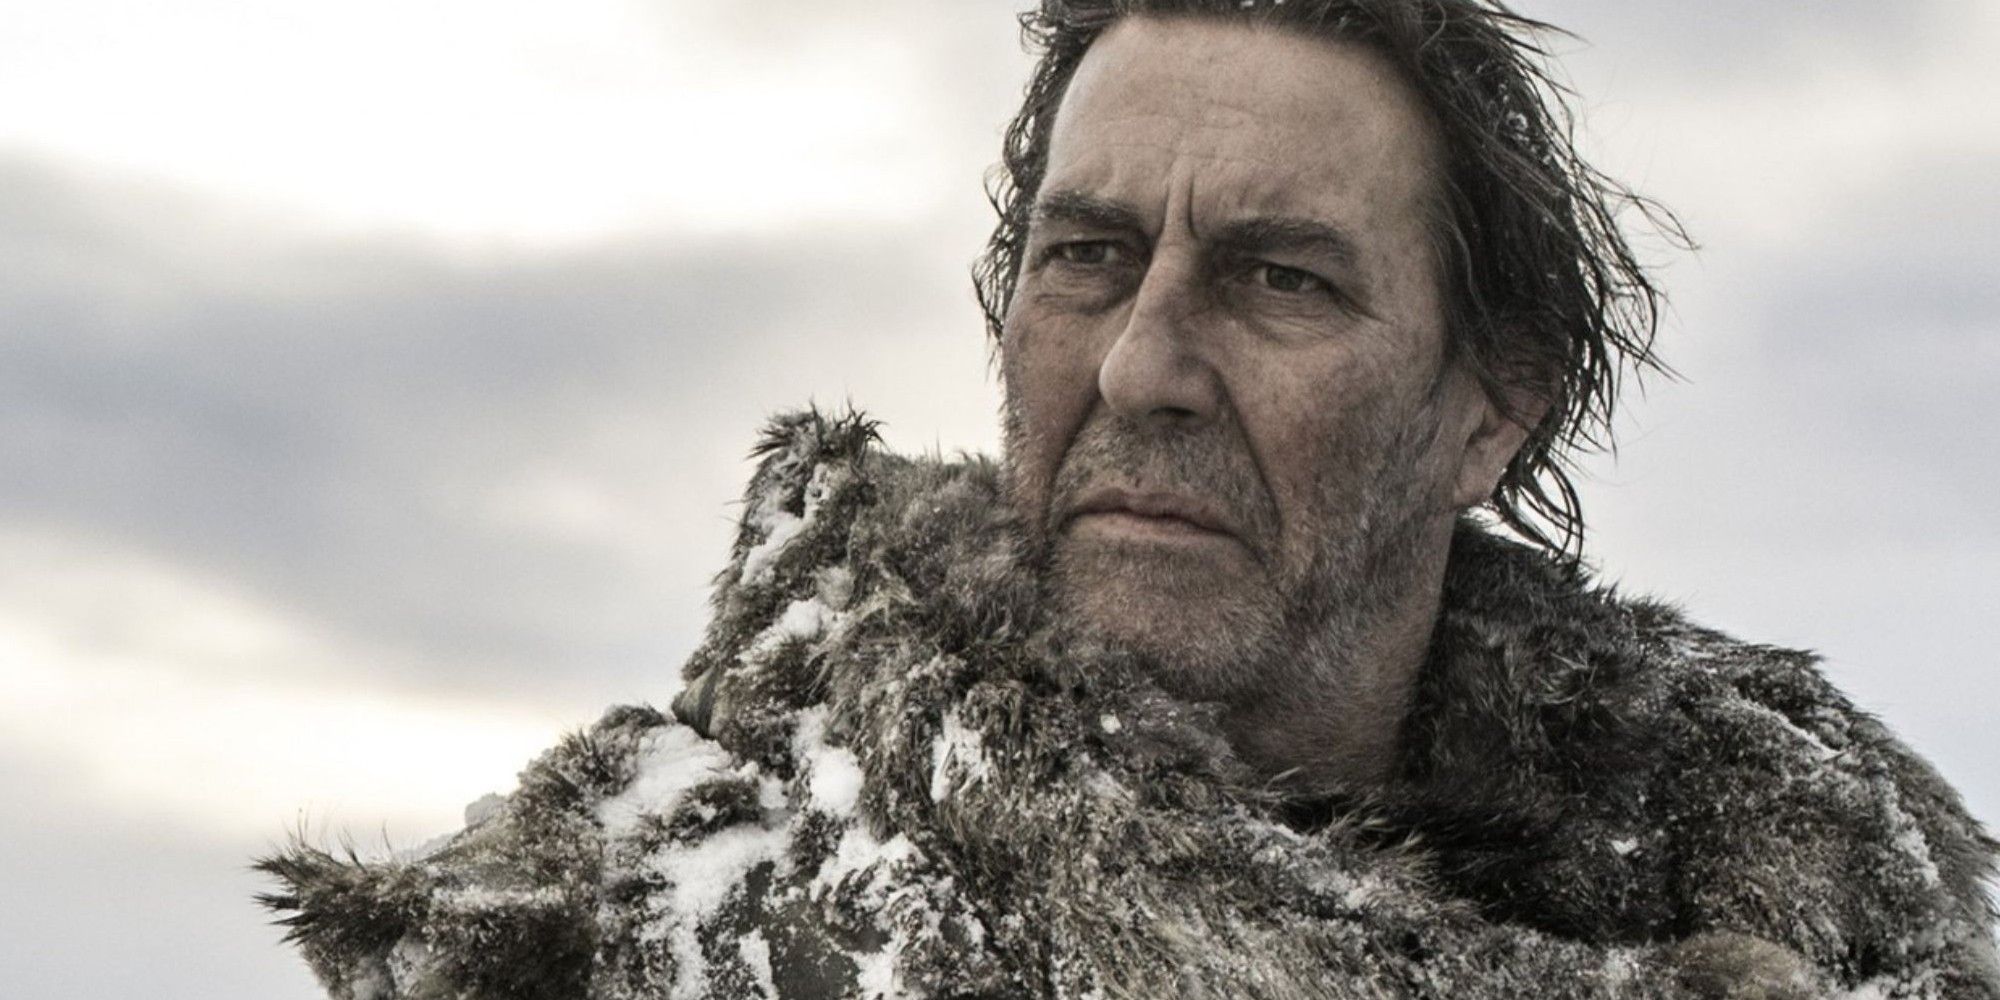 Mance Rayder looking off in the distance in Game of Thrones